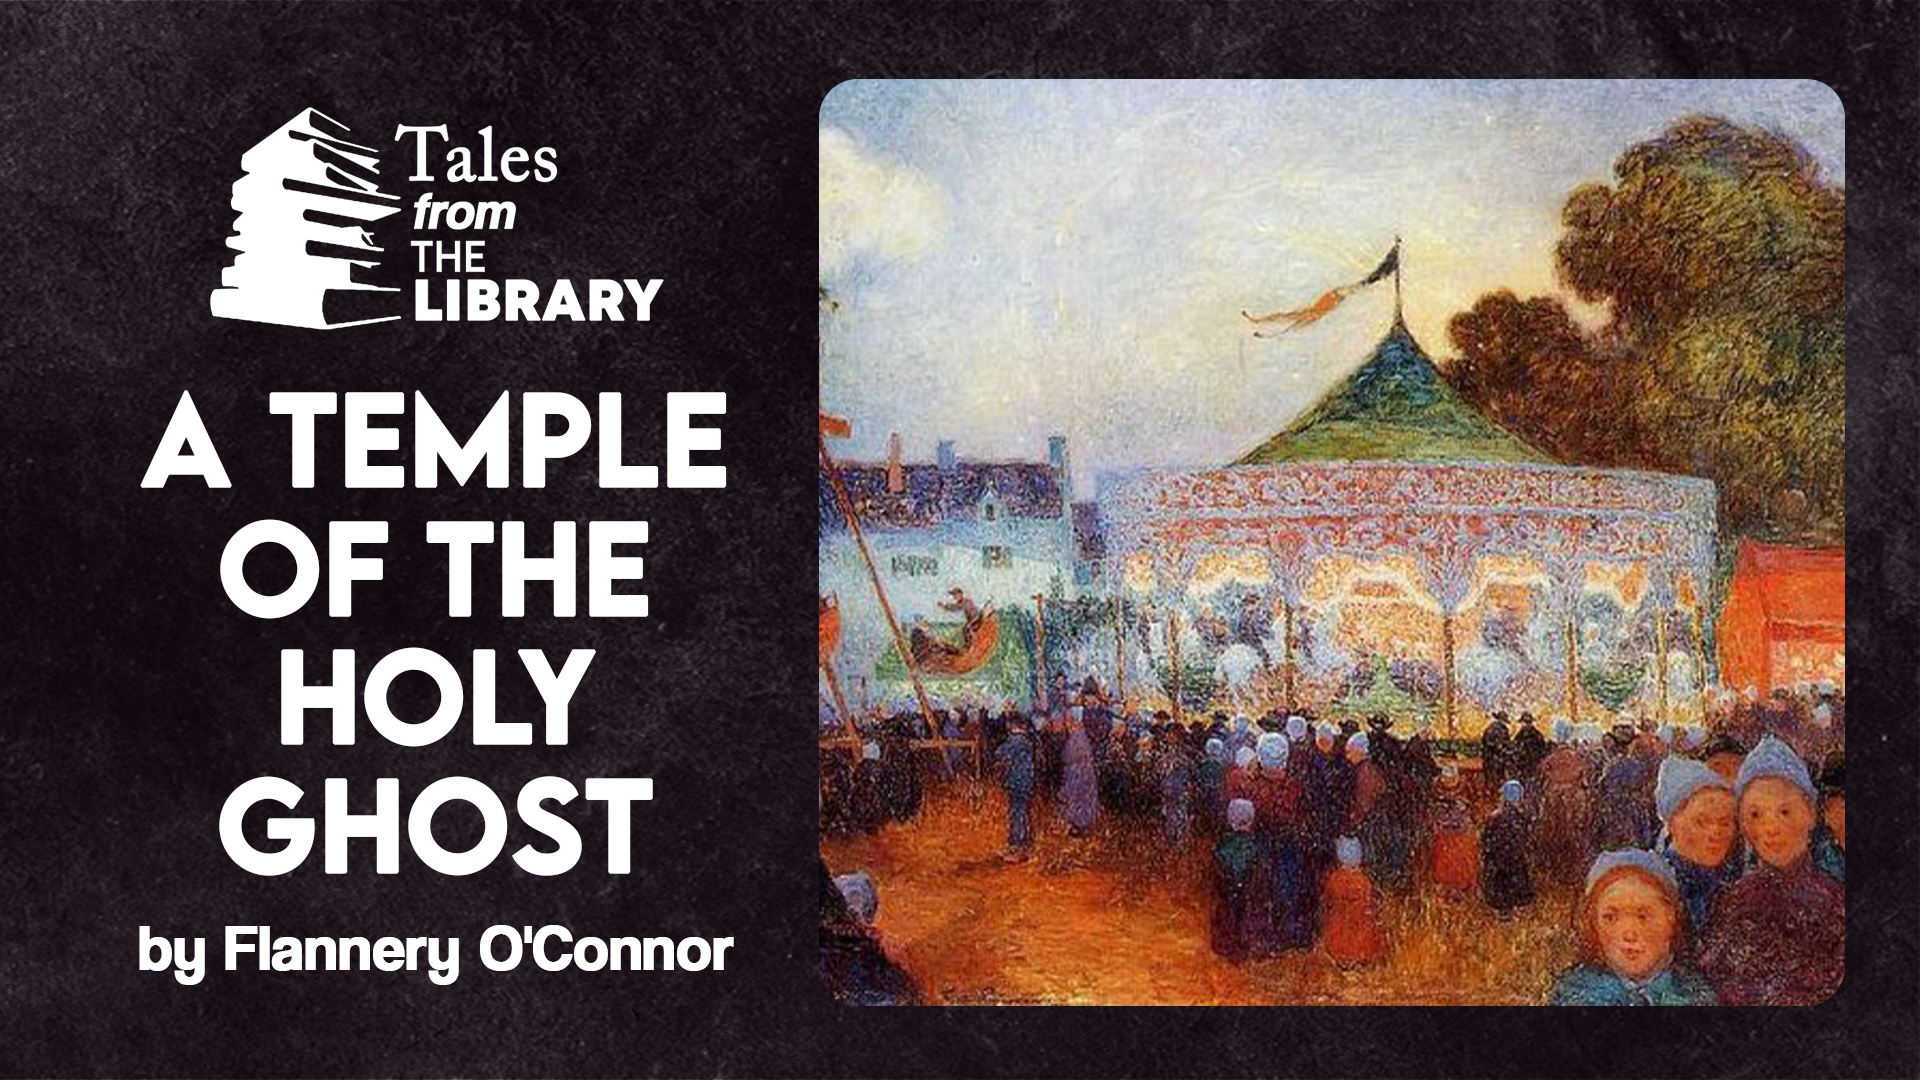 Tales From The Library - A Temple of the Holy Ghost